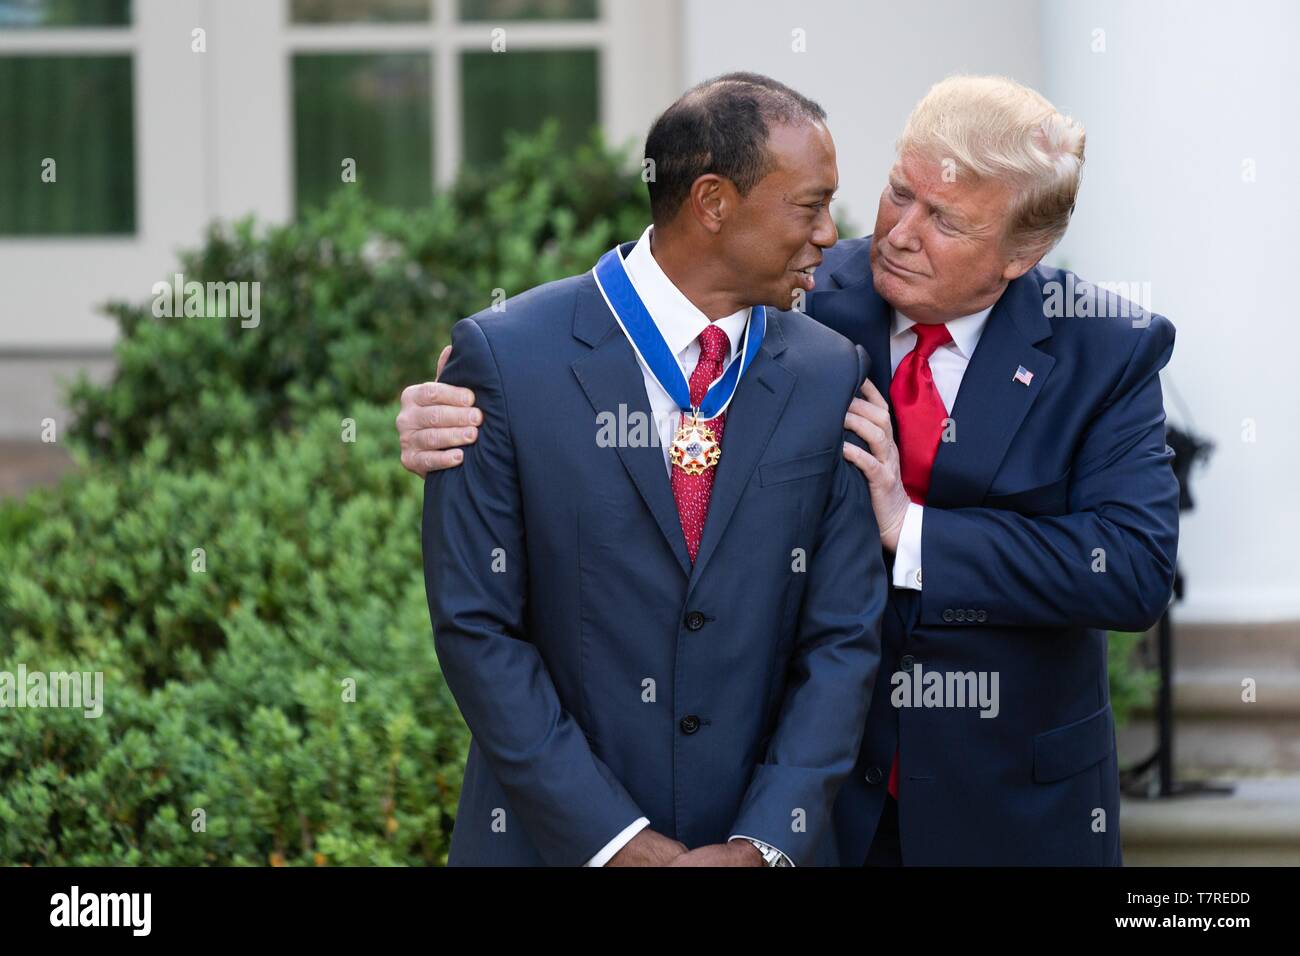 U.S President Donald Trump embraces golfer Tiger Woods during the presentation of the Presidential Medal of Freedom in the Rose Garden of the White House May 6, 2019 in Washington, DC. Stock Photo